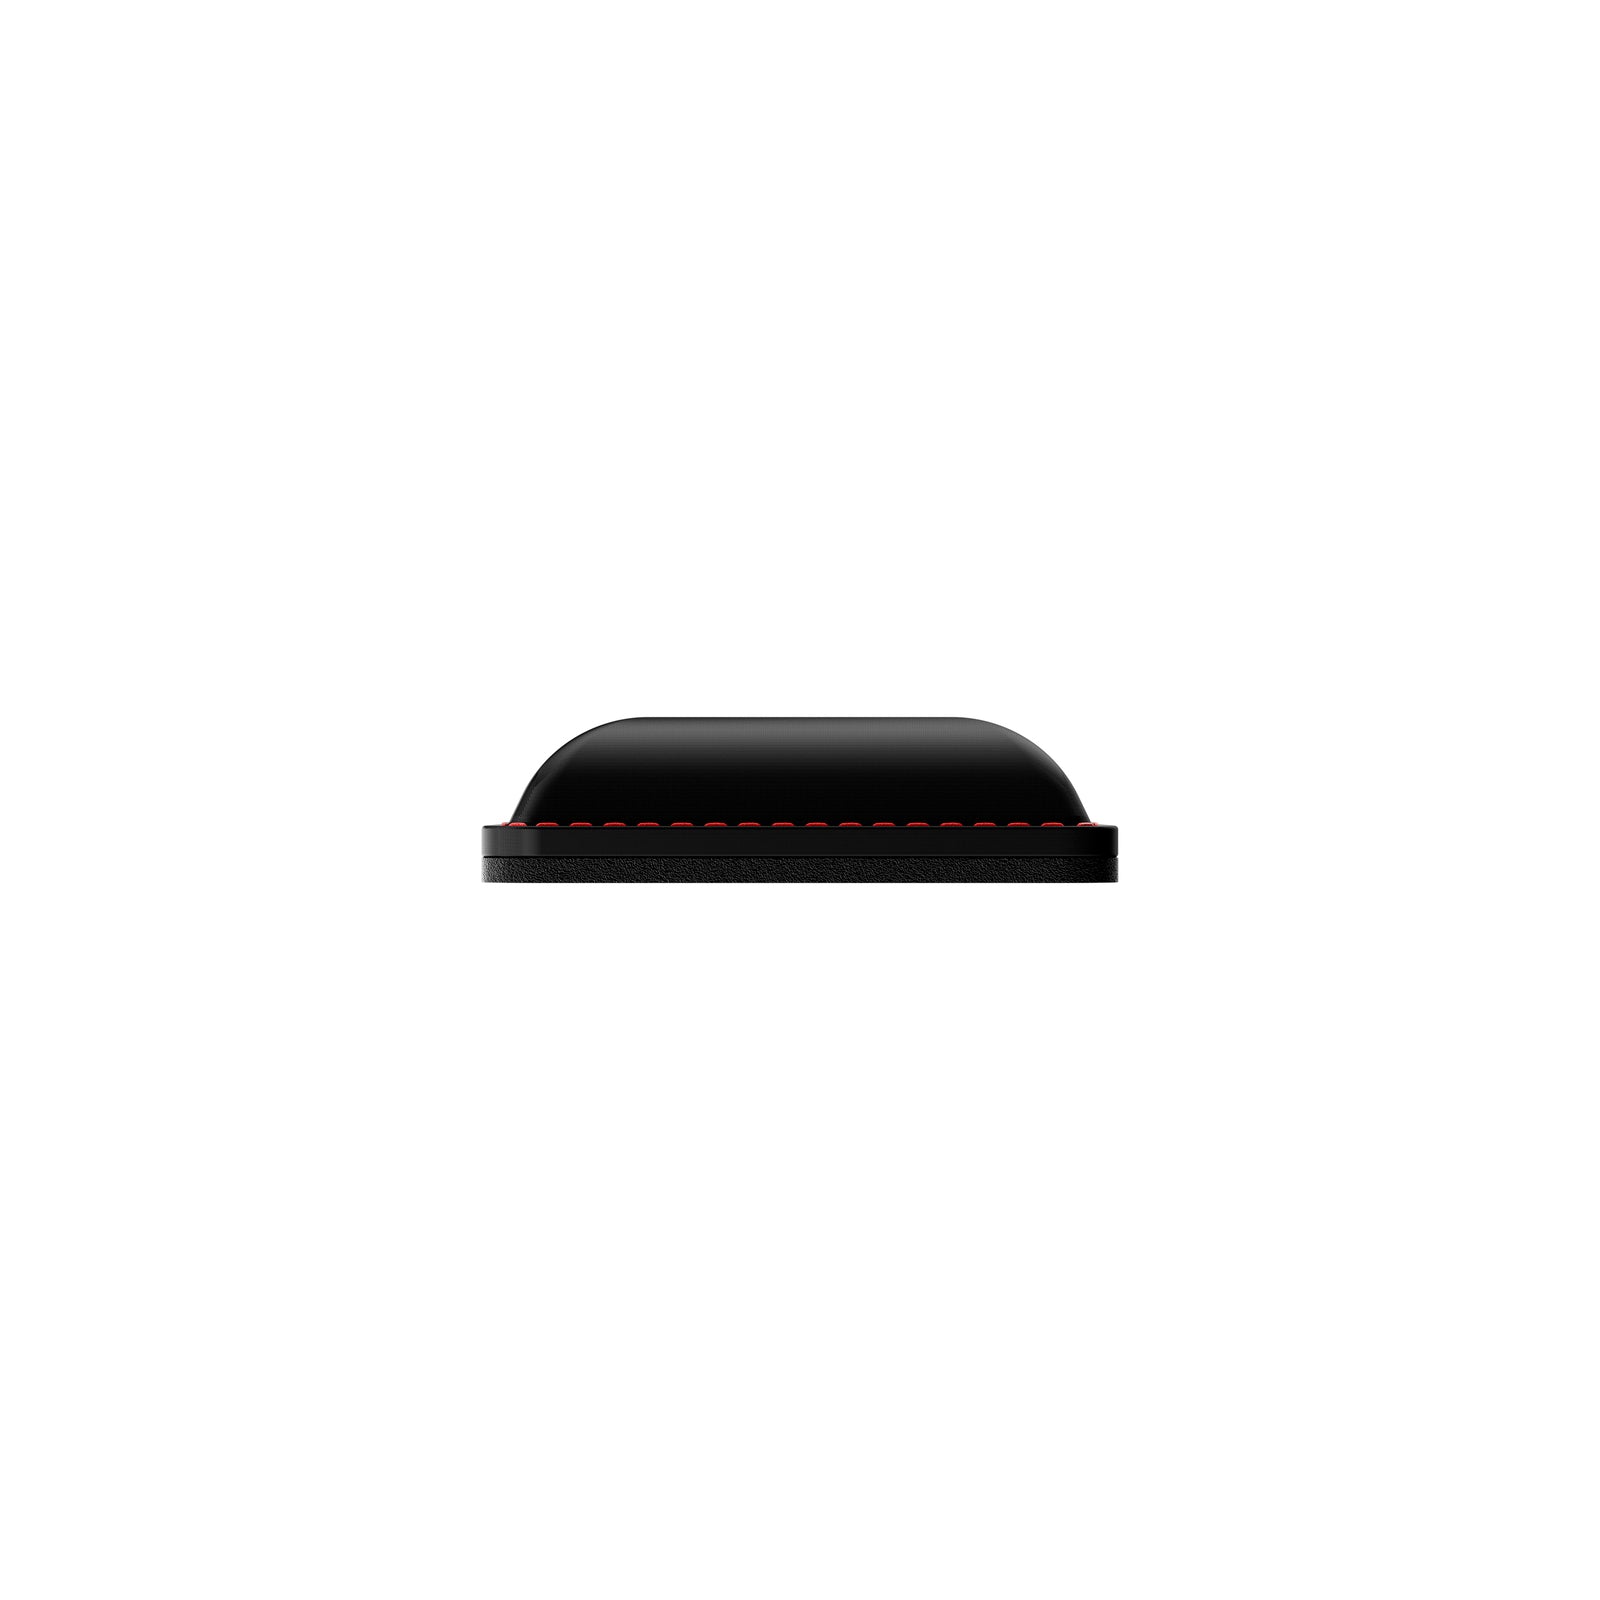 side view of HyperX Wrist rest for gaming mouse